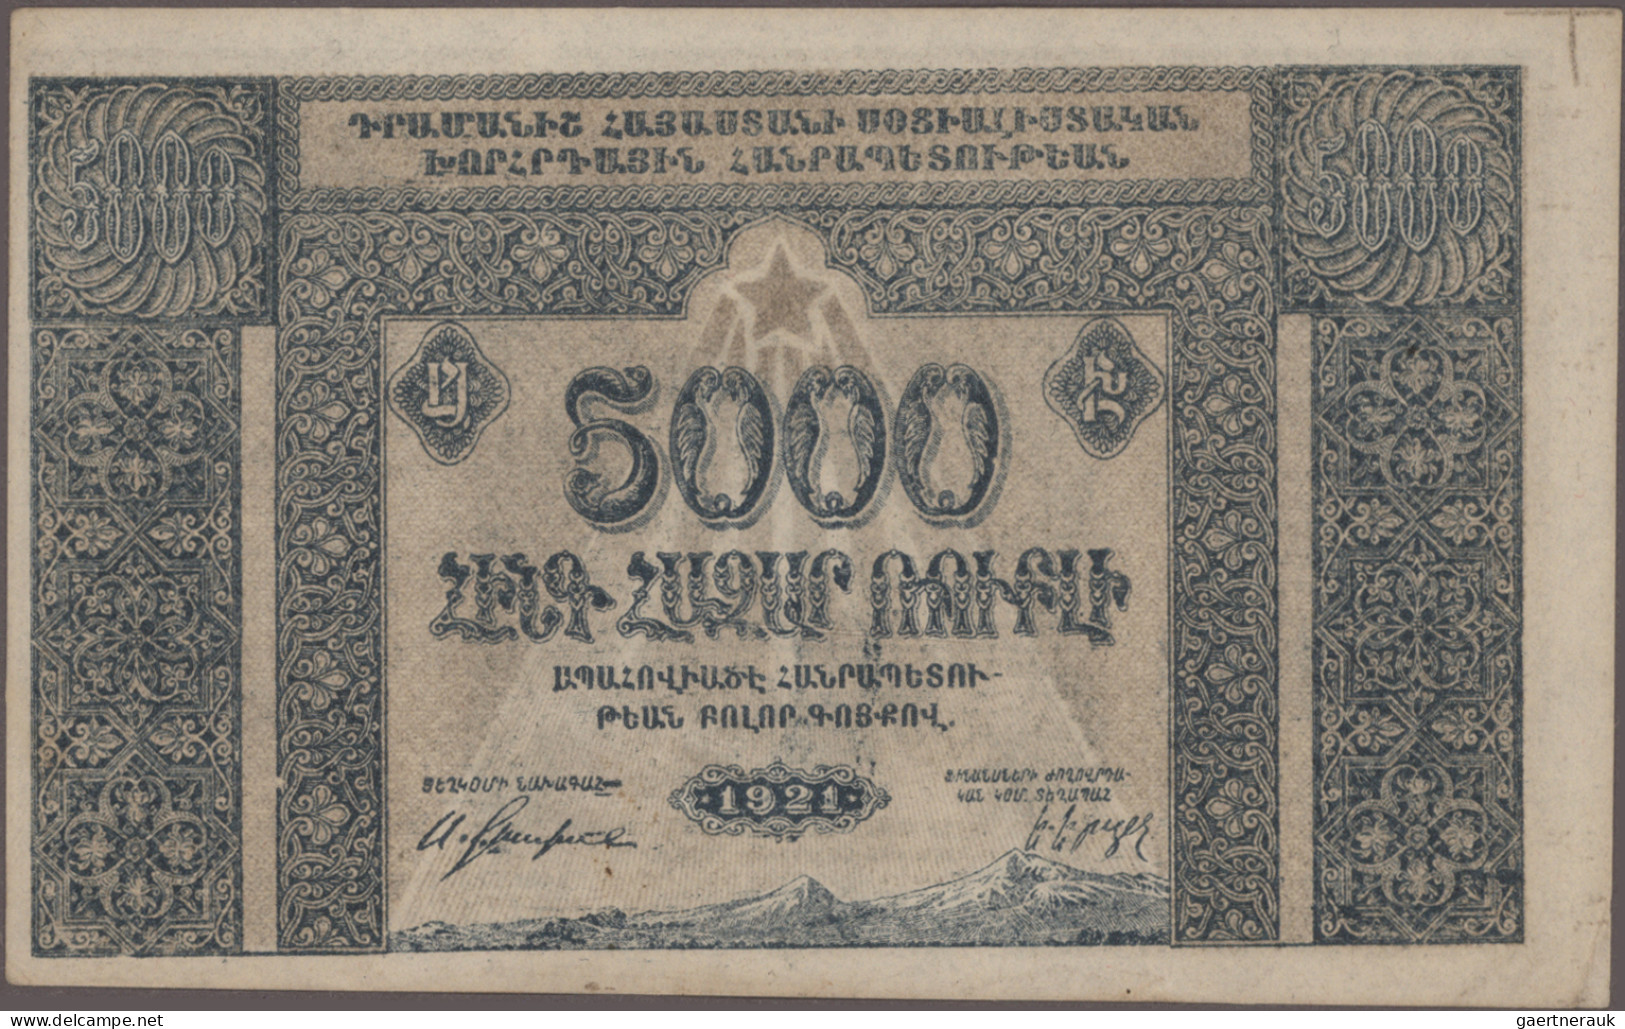 Russia - Bank Notes: Transcaucasia, huge lot with 57 banknotes, series 1918-1923